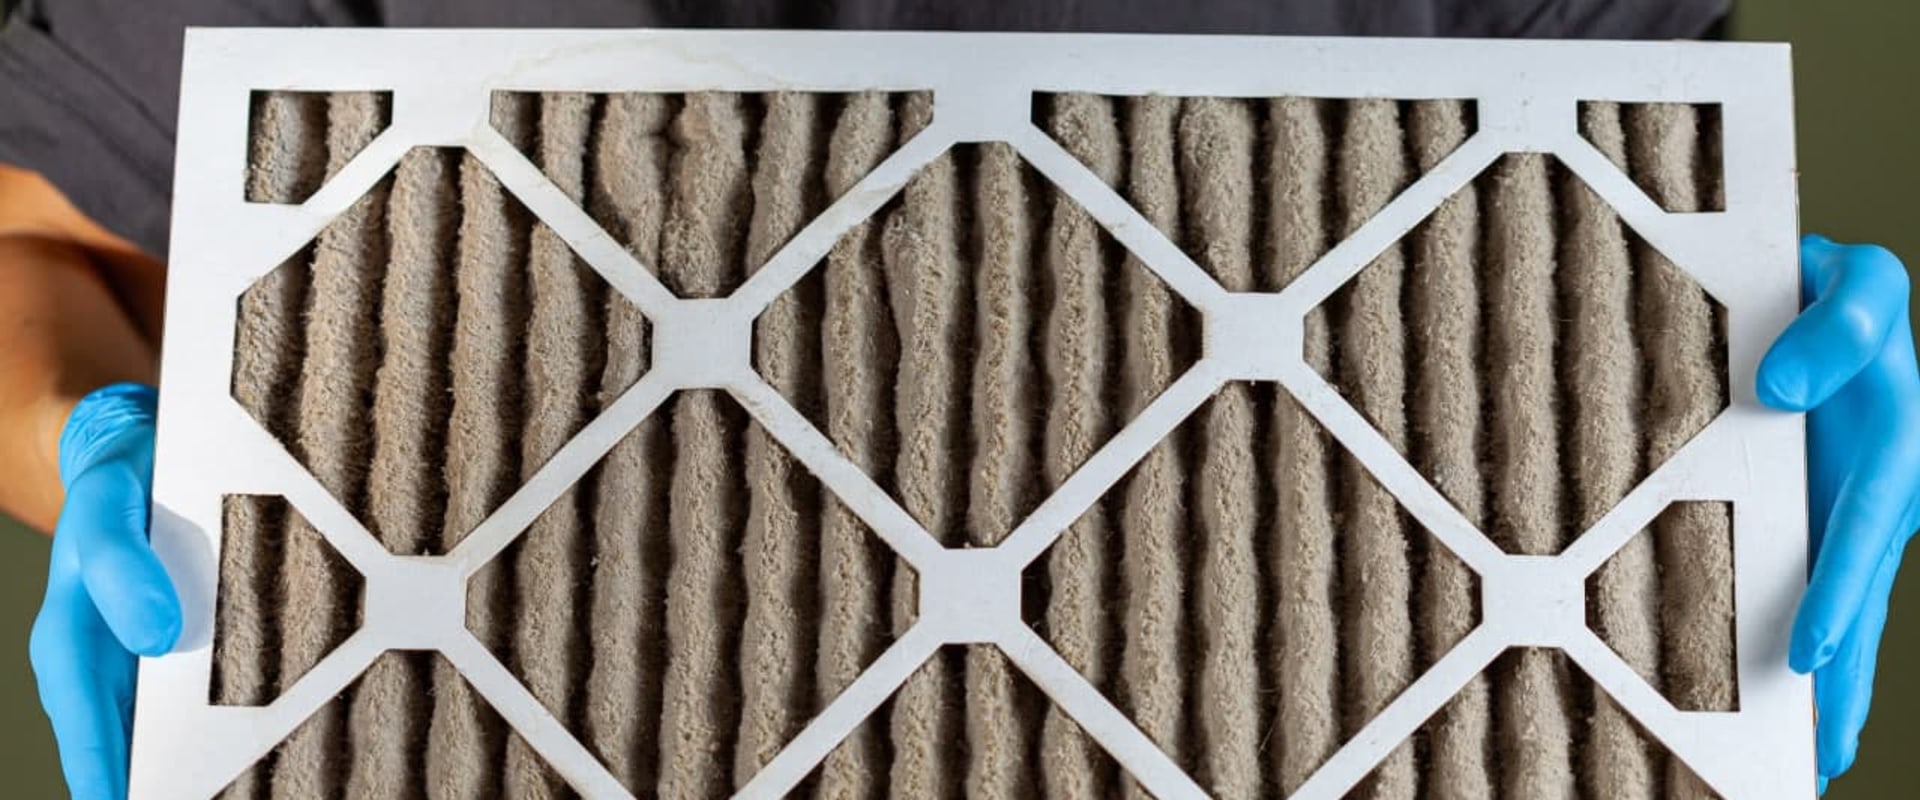 The Importance of Regularly Changing Your Home's Air Filter